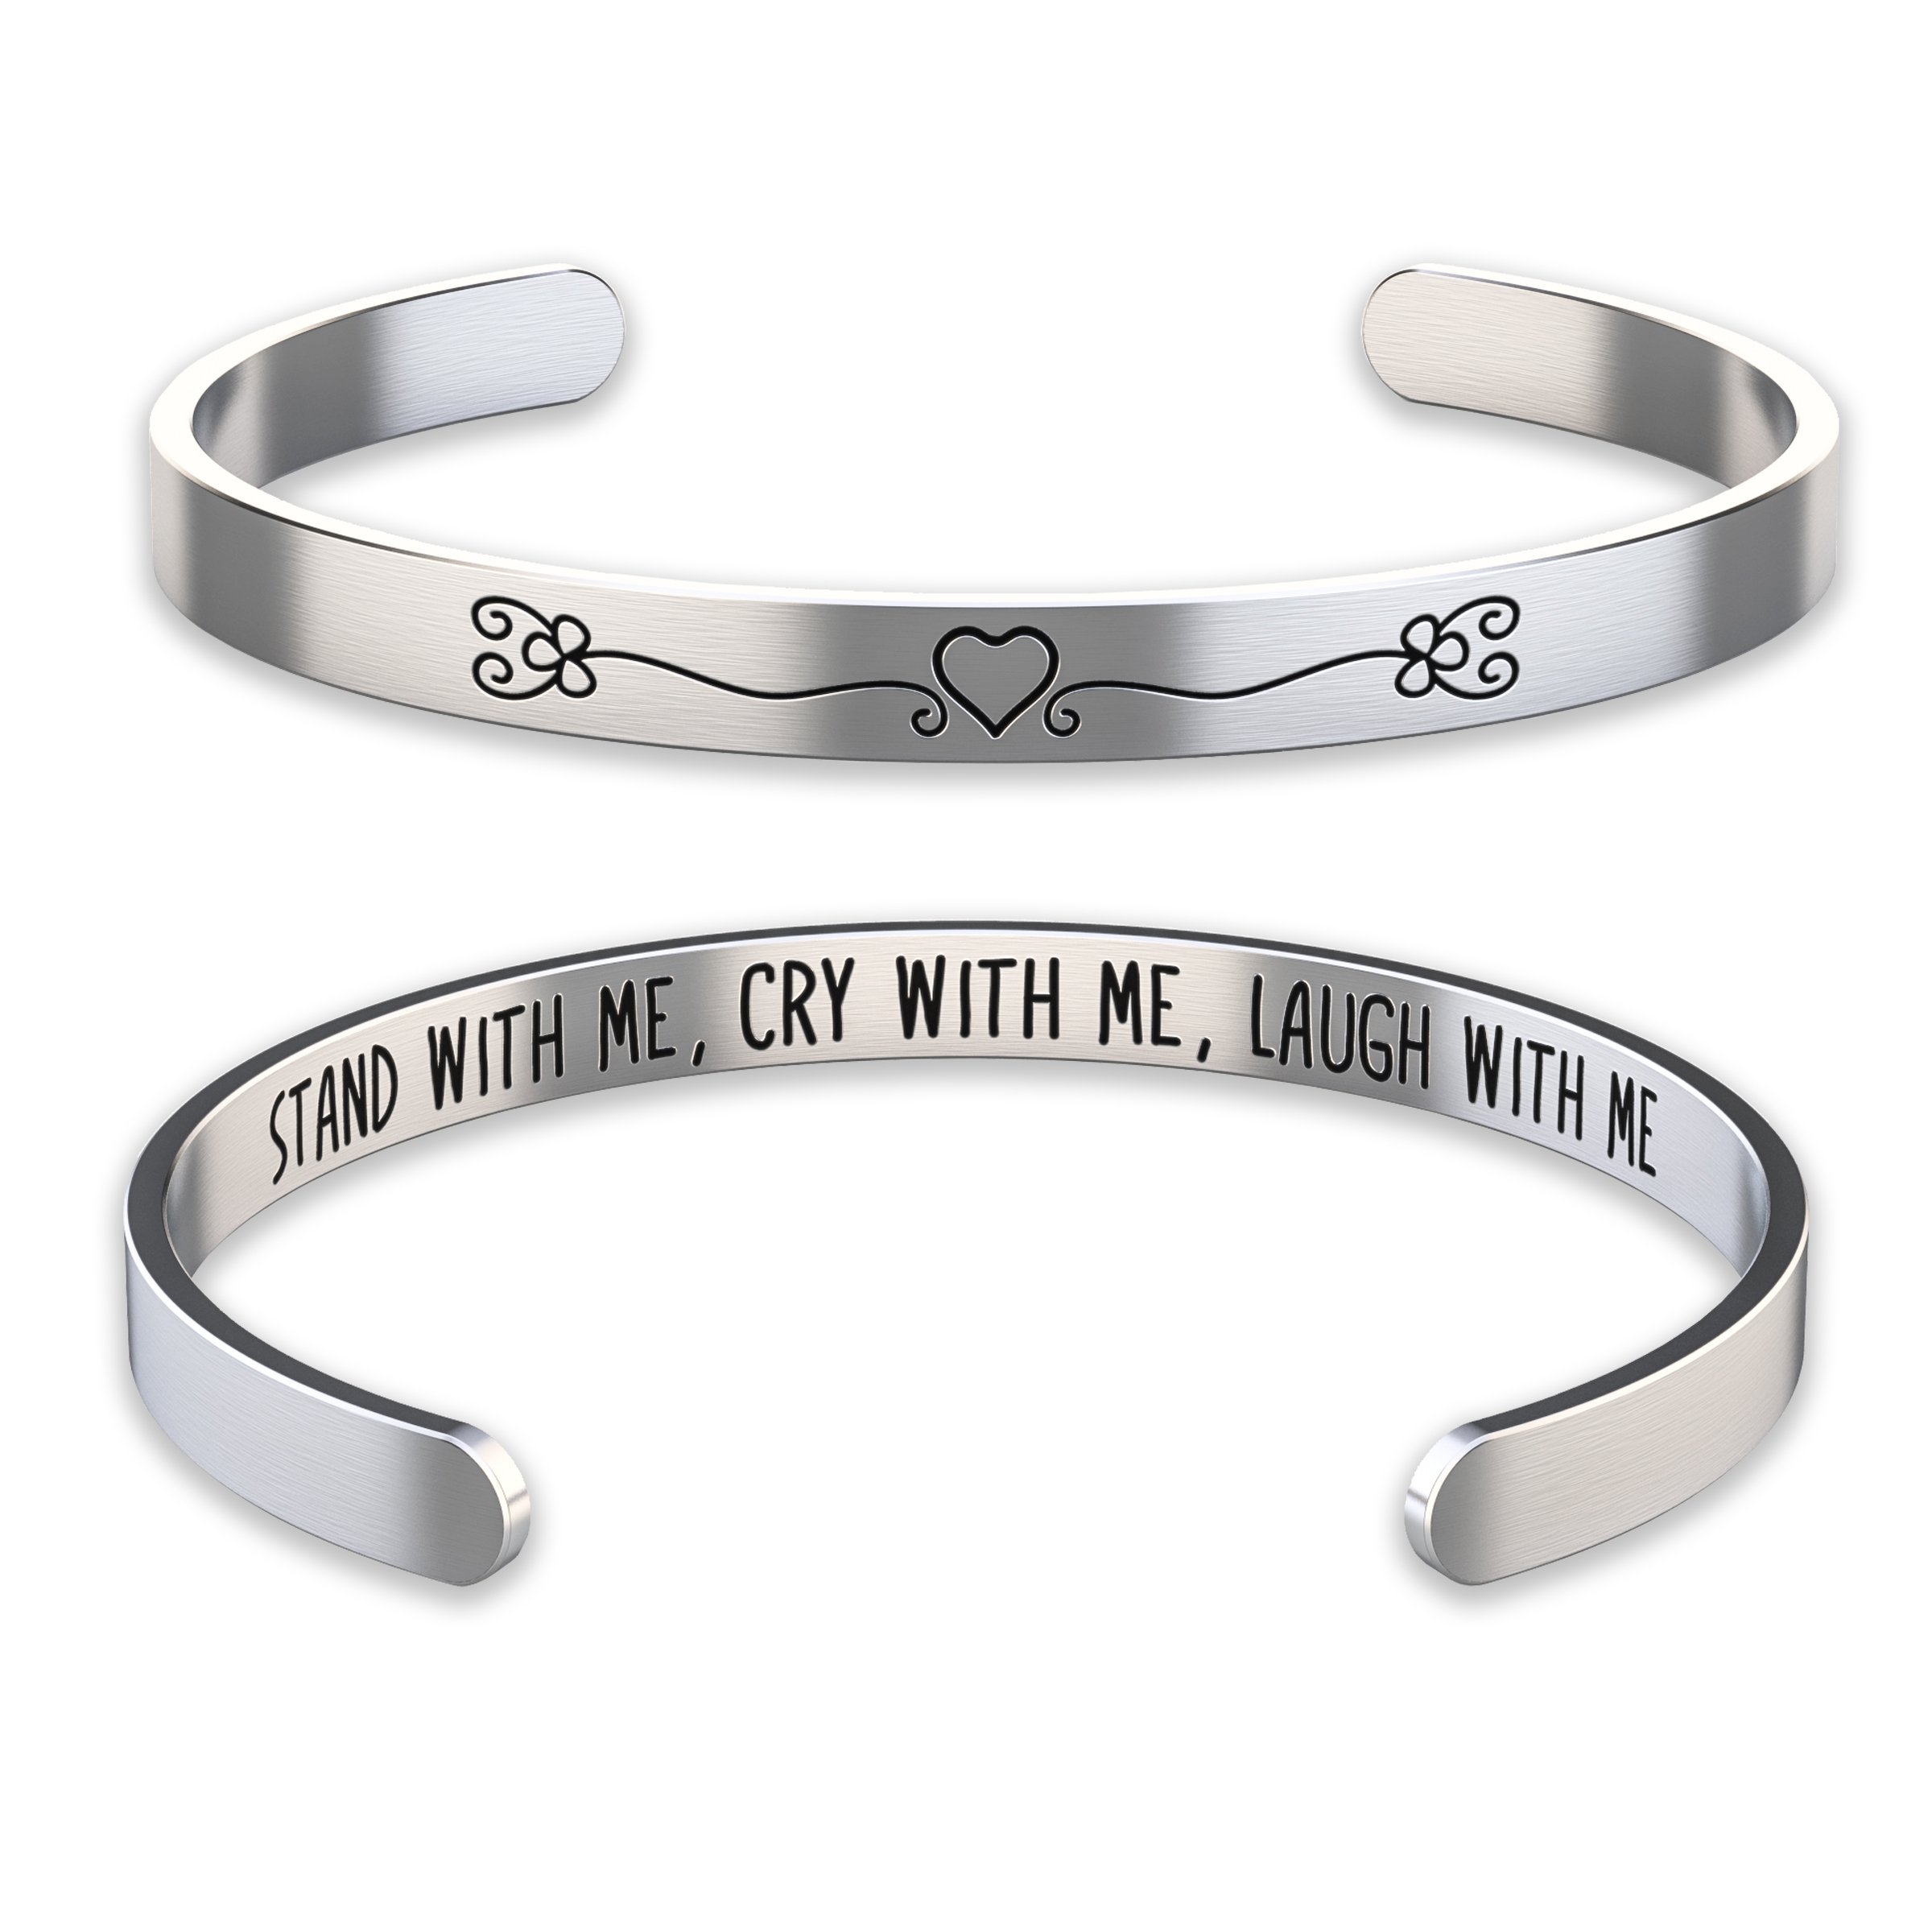 Bridesmaid Bracelet – Stand With Me, Cry With Me, Laugh With Me – Happy Kisses